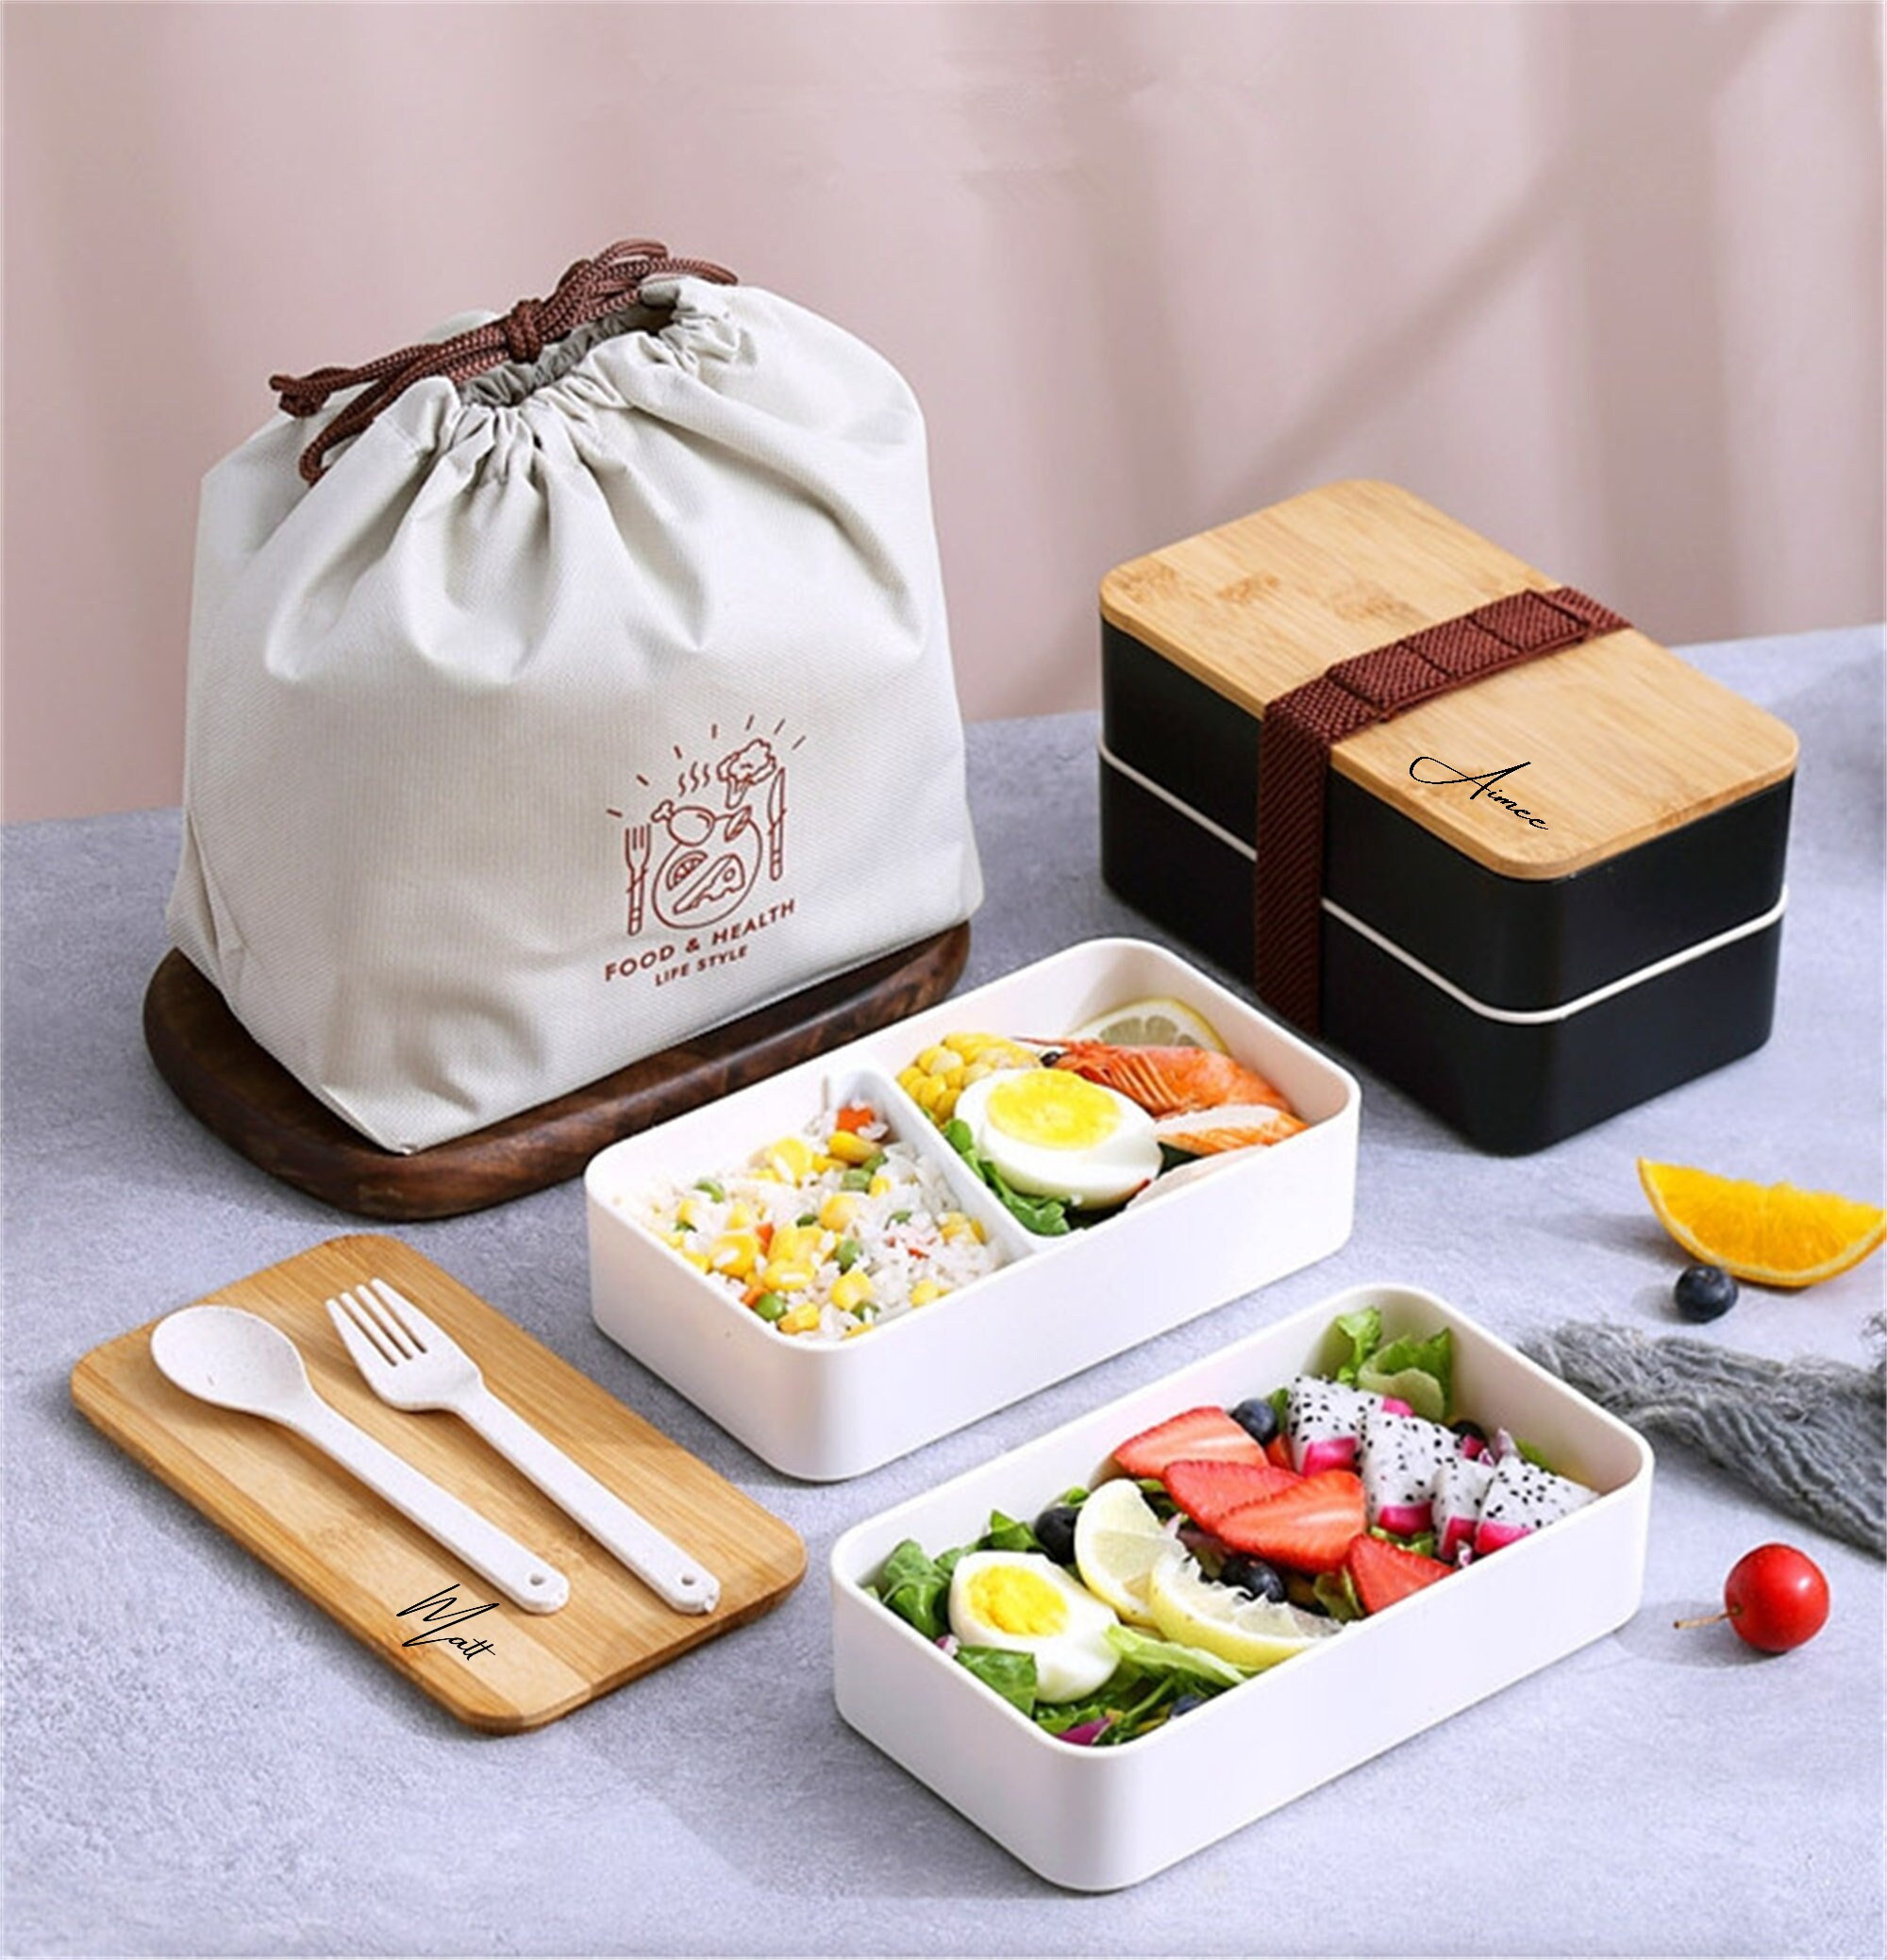 Stainless Steel Lunch Box for Adults, BPA-Free Metal Bento Box with (2 Compartments) - Leak Proof and Crack Resistant - Eco Friendly Lunch Container